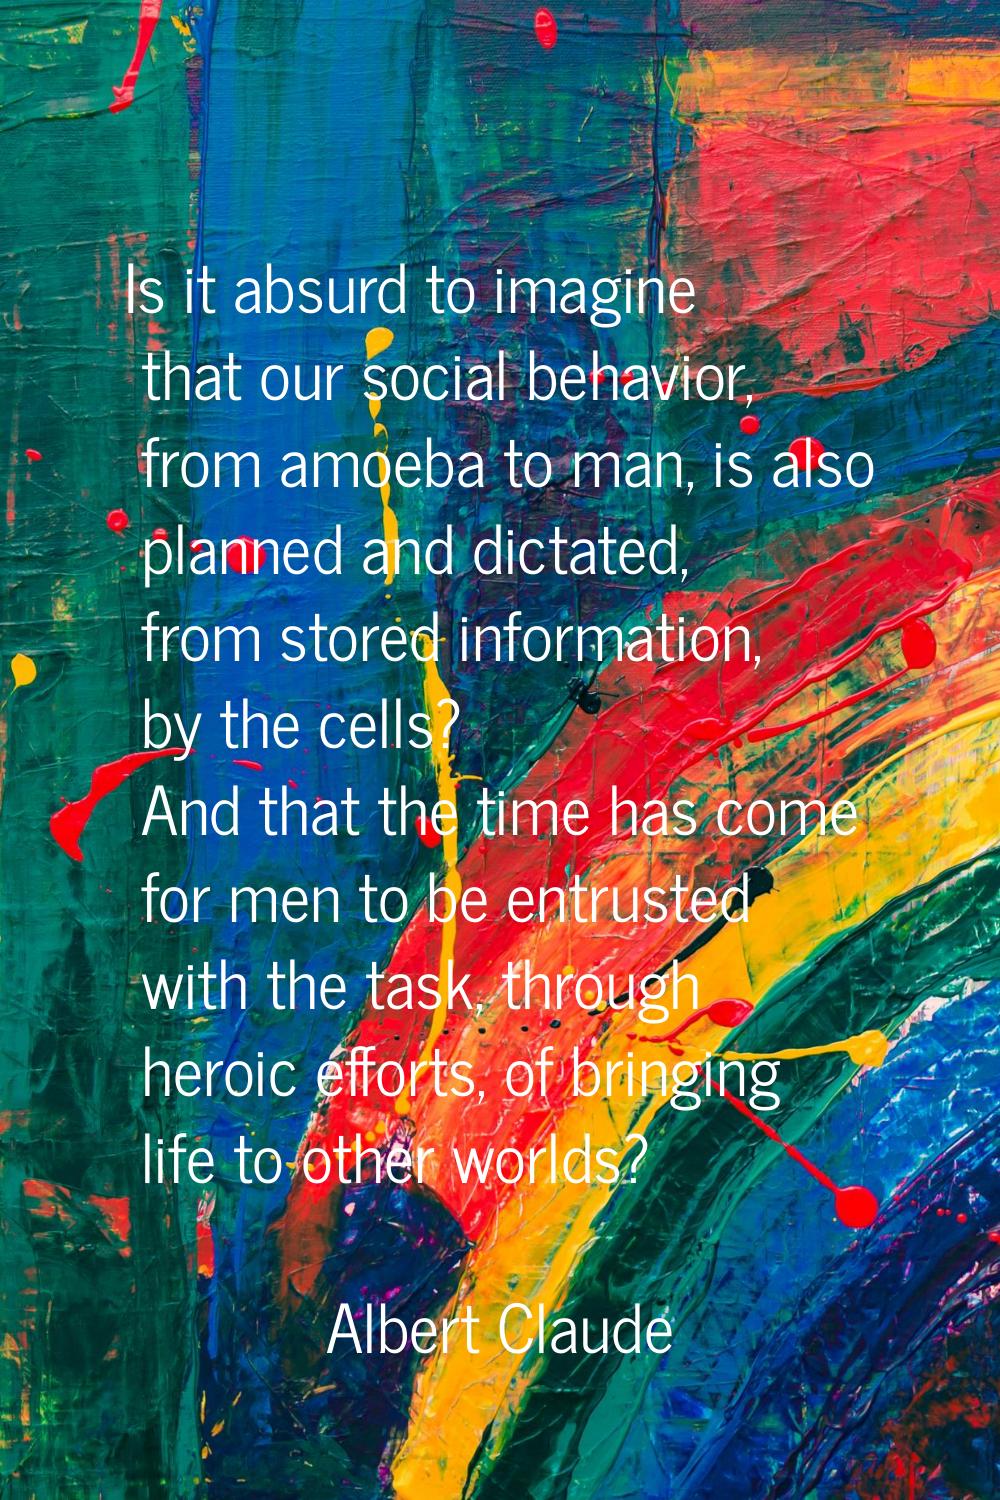 Is it absurd to imagine that our social behavior, from amoeba to man, is also planned and dictated,